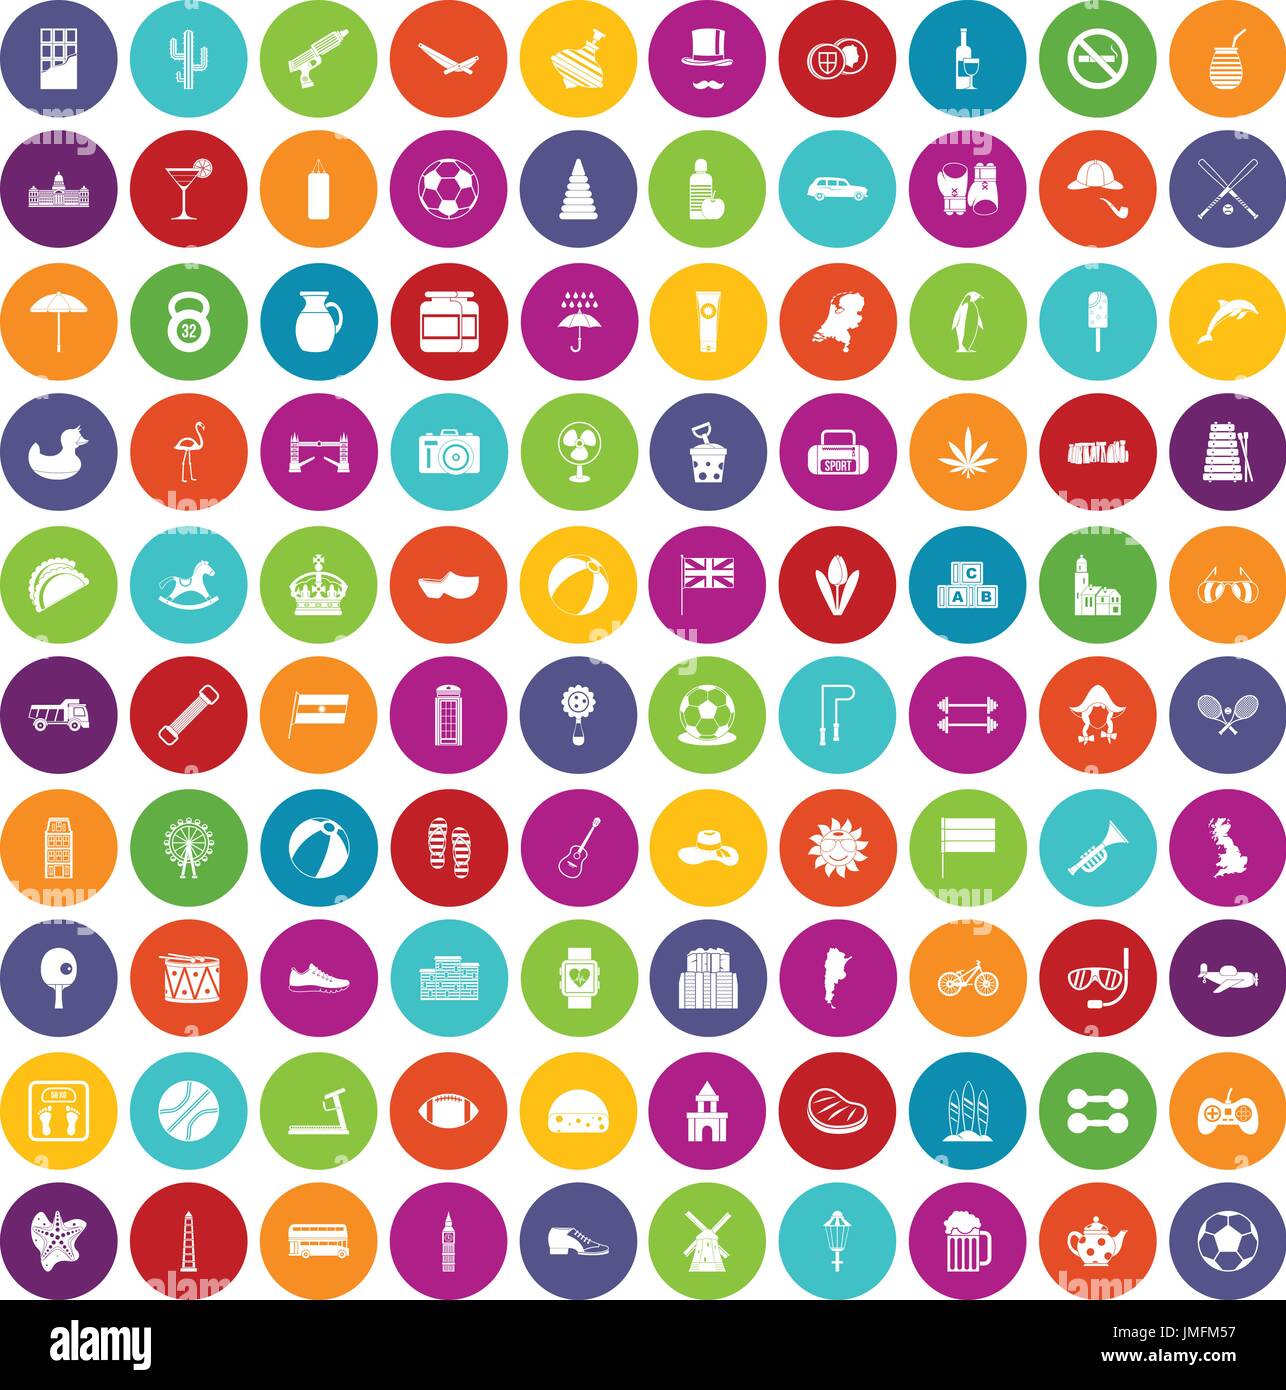 100 ball icons set color Stock Vector